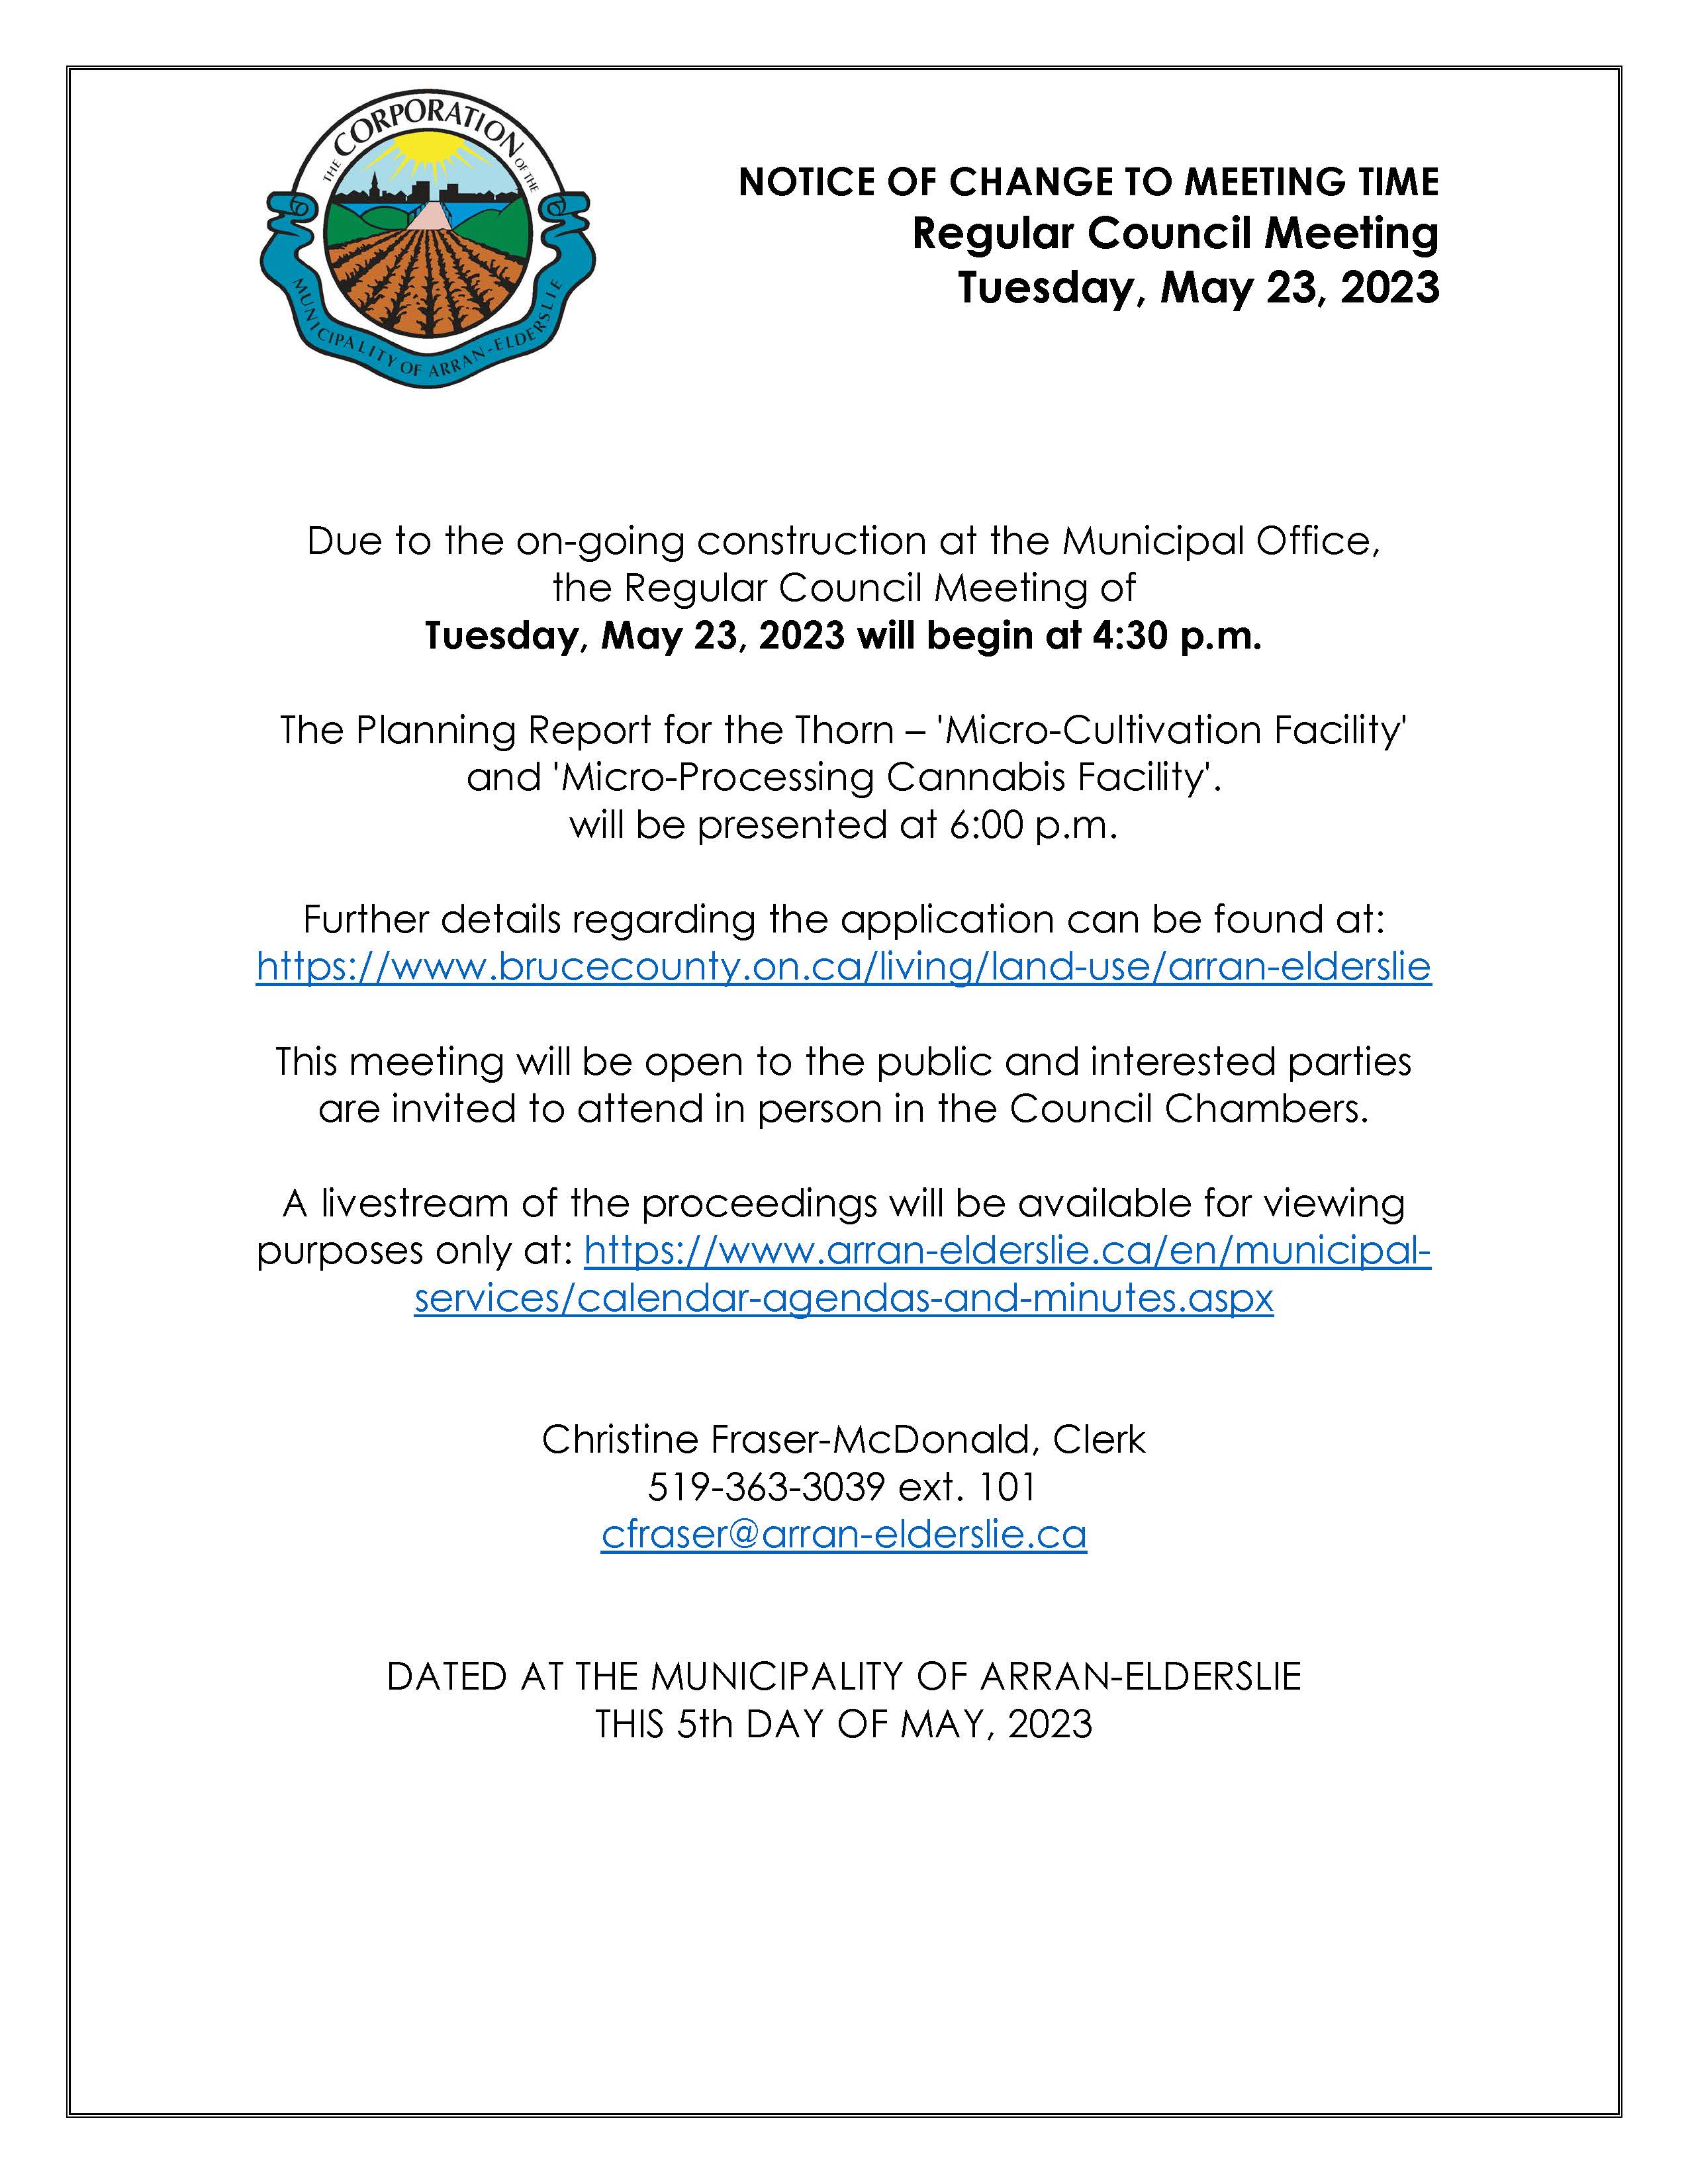 Notice of Time Change for May 23 Council Meeting 